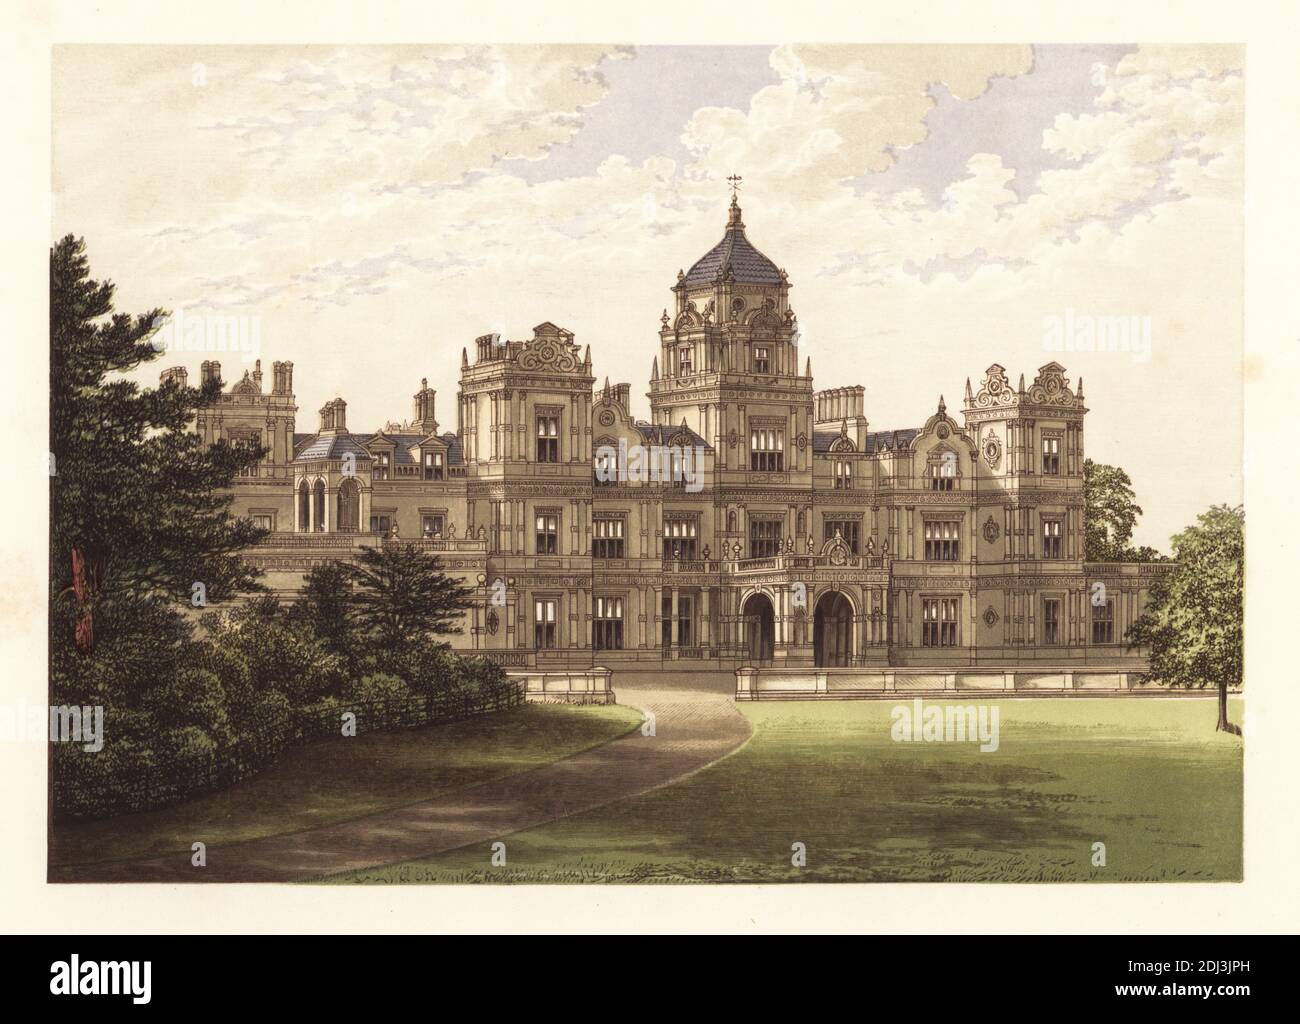 Westonbirt House, Gloucestershire, England. Mansion house designed by architect Lewis Vulliamy for owner Robert Stayner Holford in 1839. Colour woodblock by Benjamin Fawcett in the Baxter process of an illustration by Alexander Francis Lydon from Reverend Francis Orpen Morris’s Picturesque Views of the Seats of Noblemen and Gentlemen of Great Britain and Ireland, William Mackenzie, London, 1880. Stock Photo